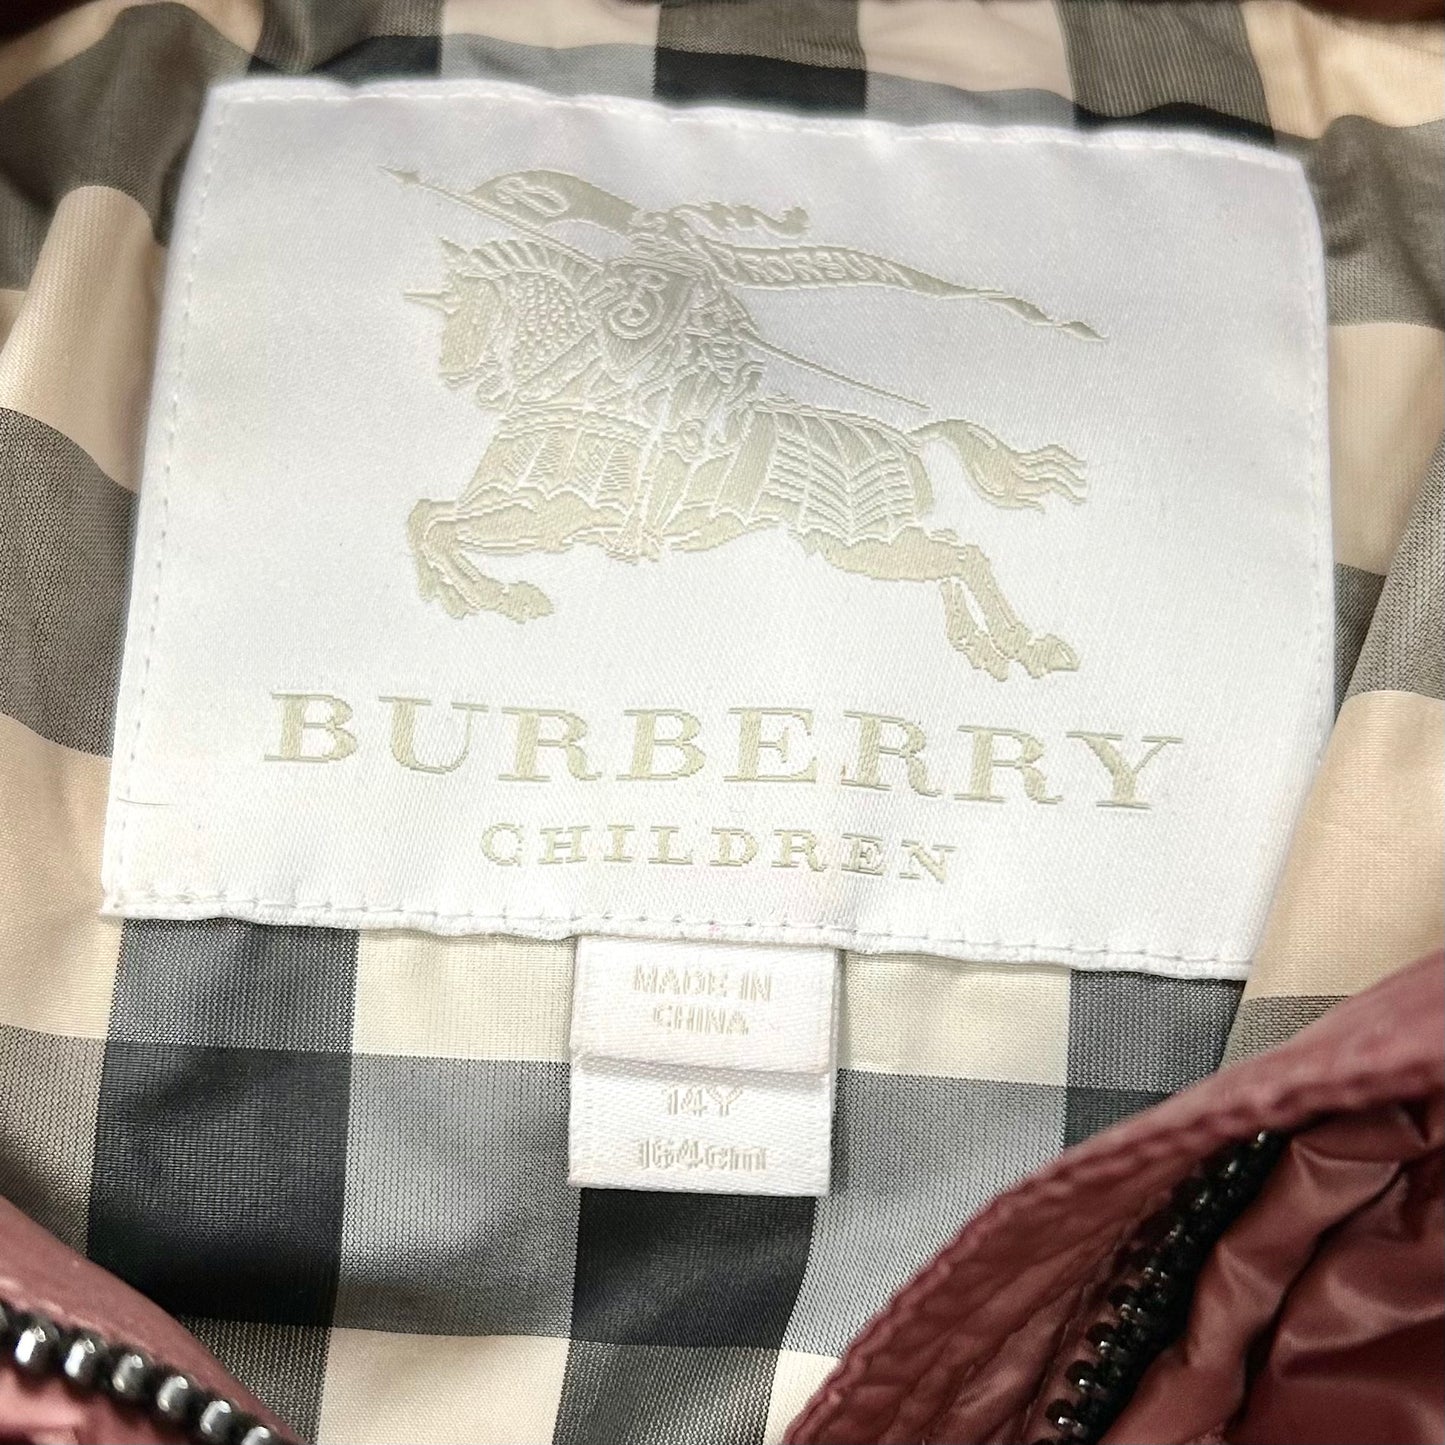 Coat Designer By Burberry  Size: Xs